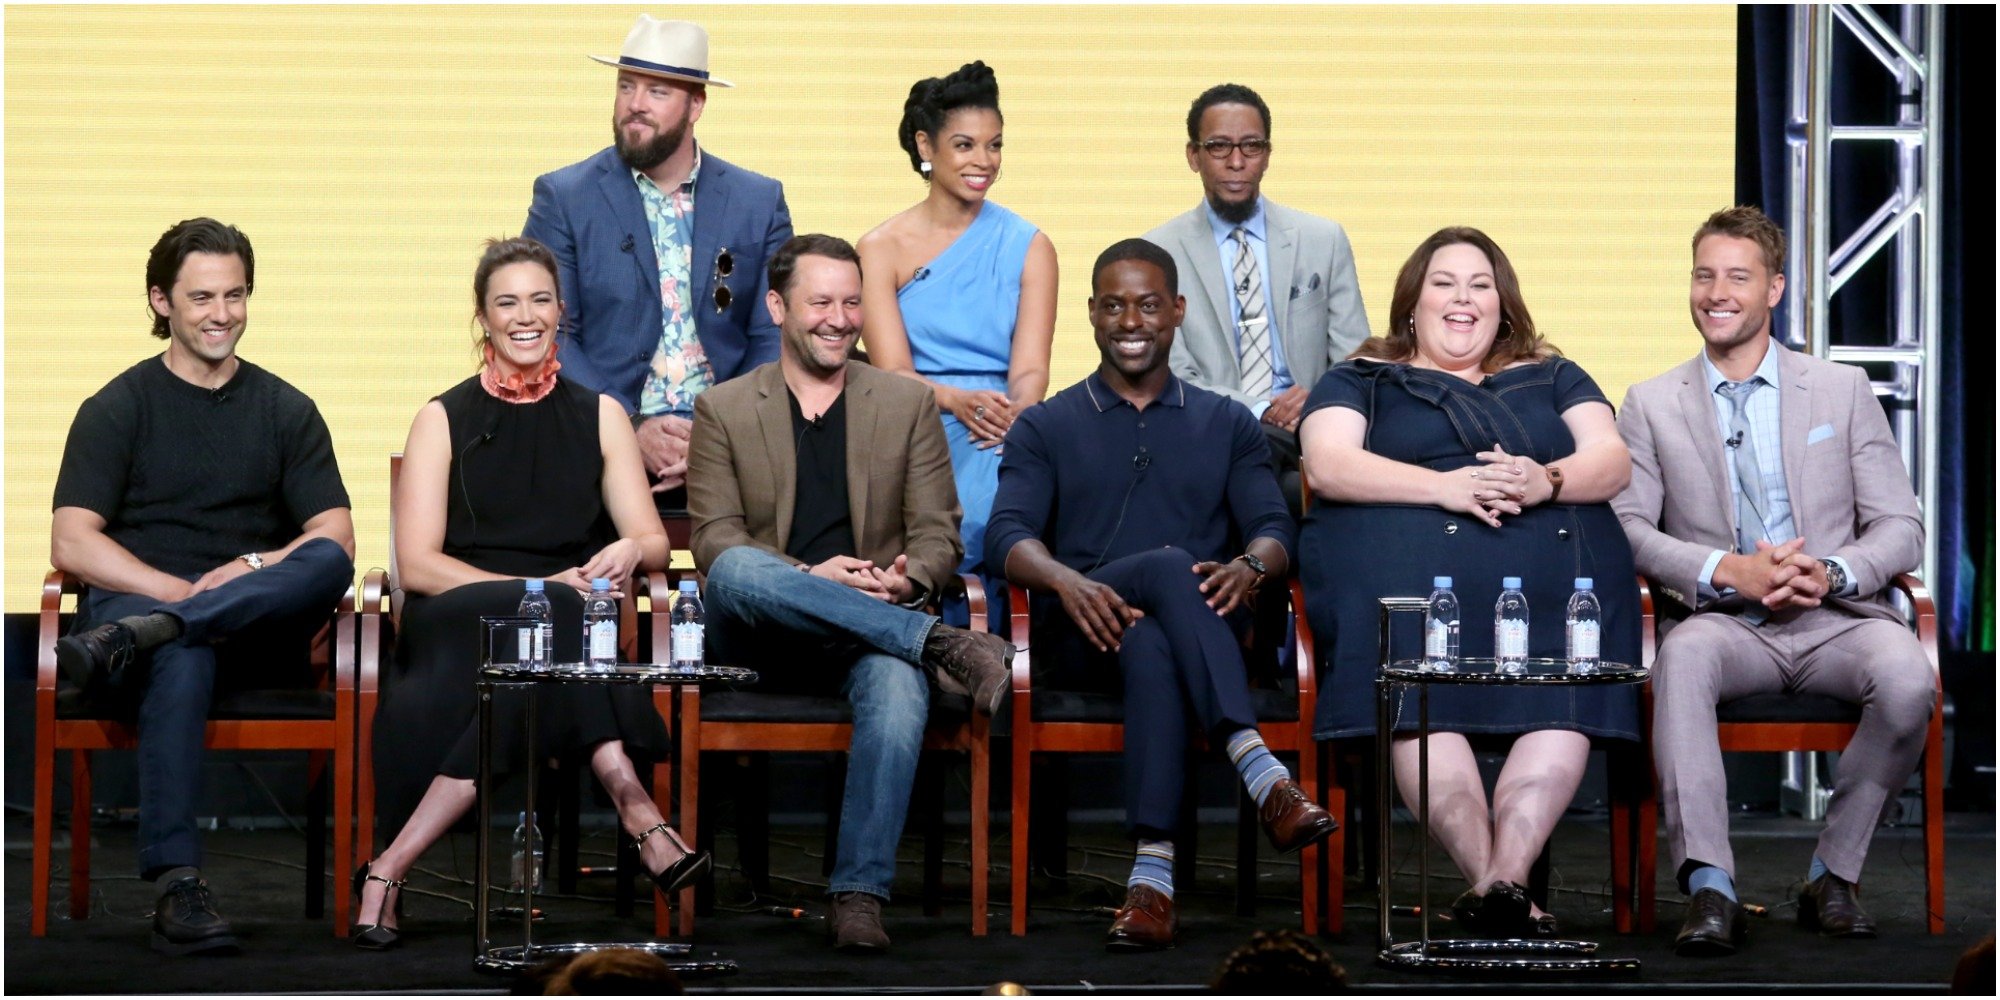 The cast of NBC's This Is Us and showrunner Dan Fogelman in a 2017 photograph.